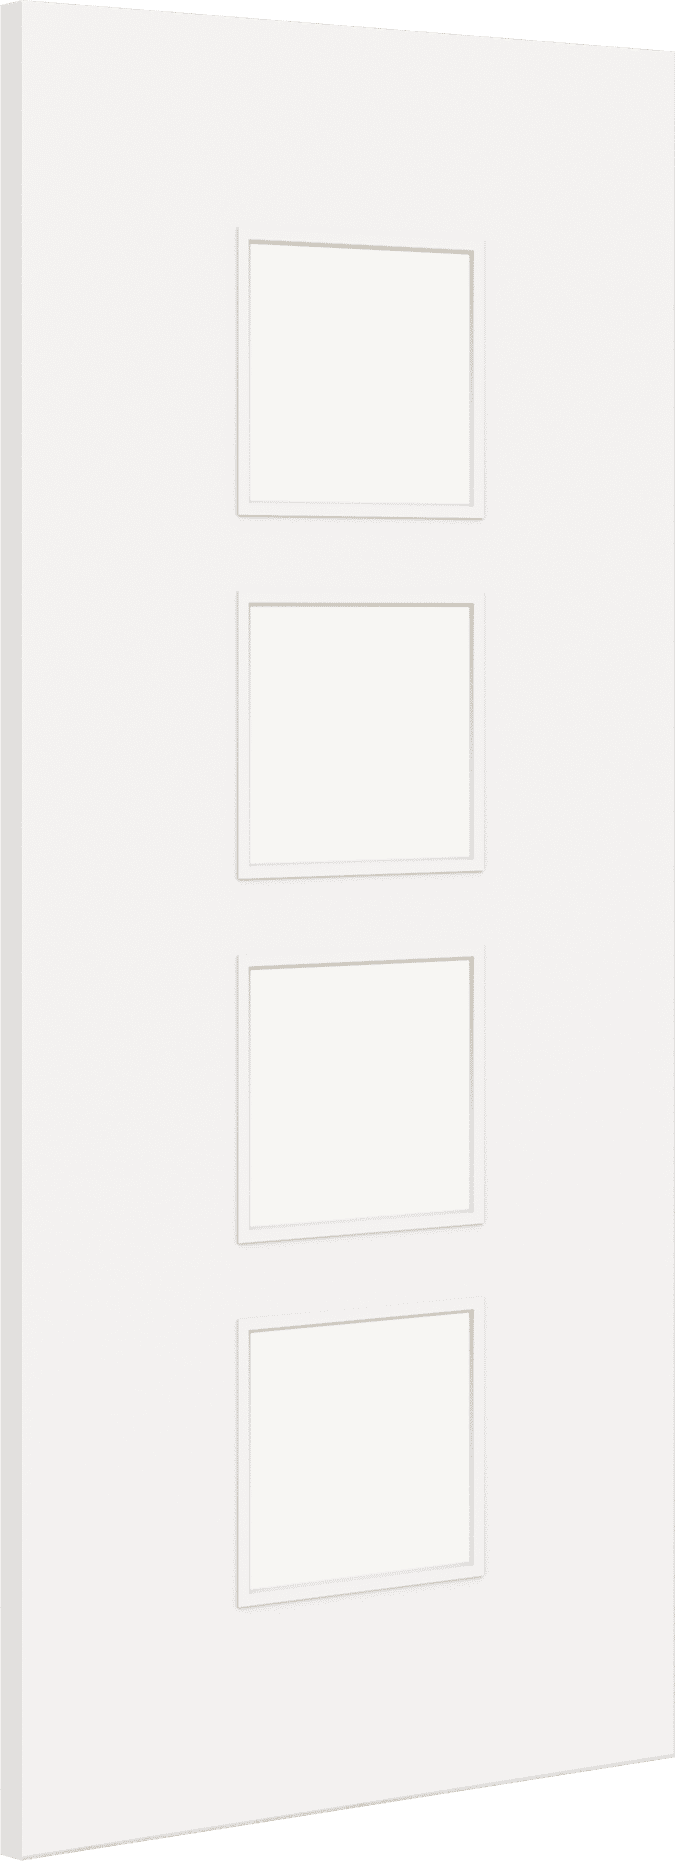 1981mm x 610mm x 44mm (24") Architectural Paint Grade White 09 Clear Glazed Fire Door Blank